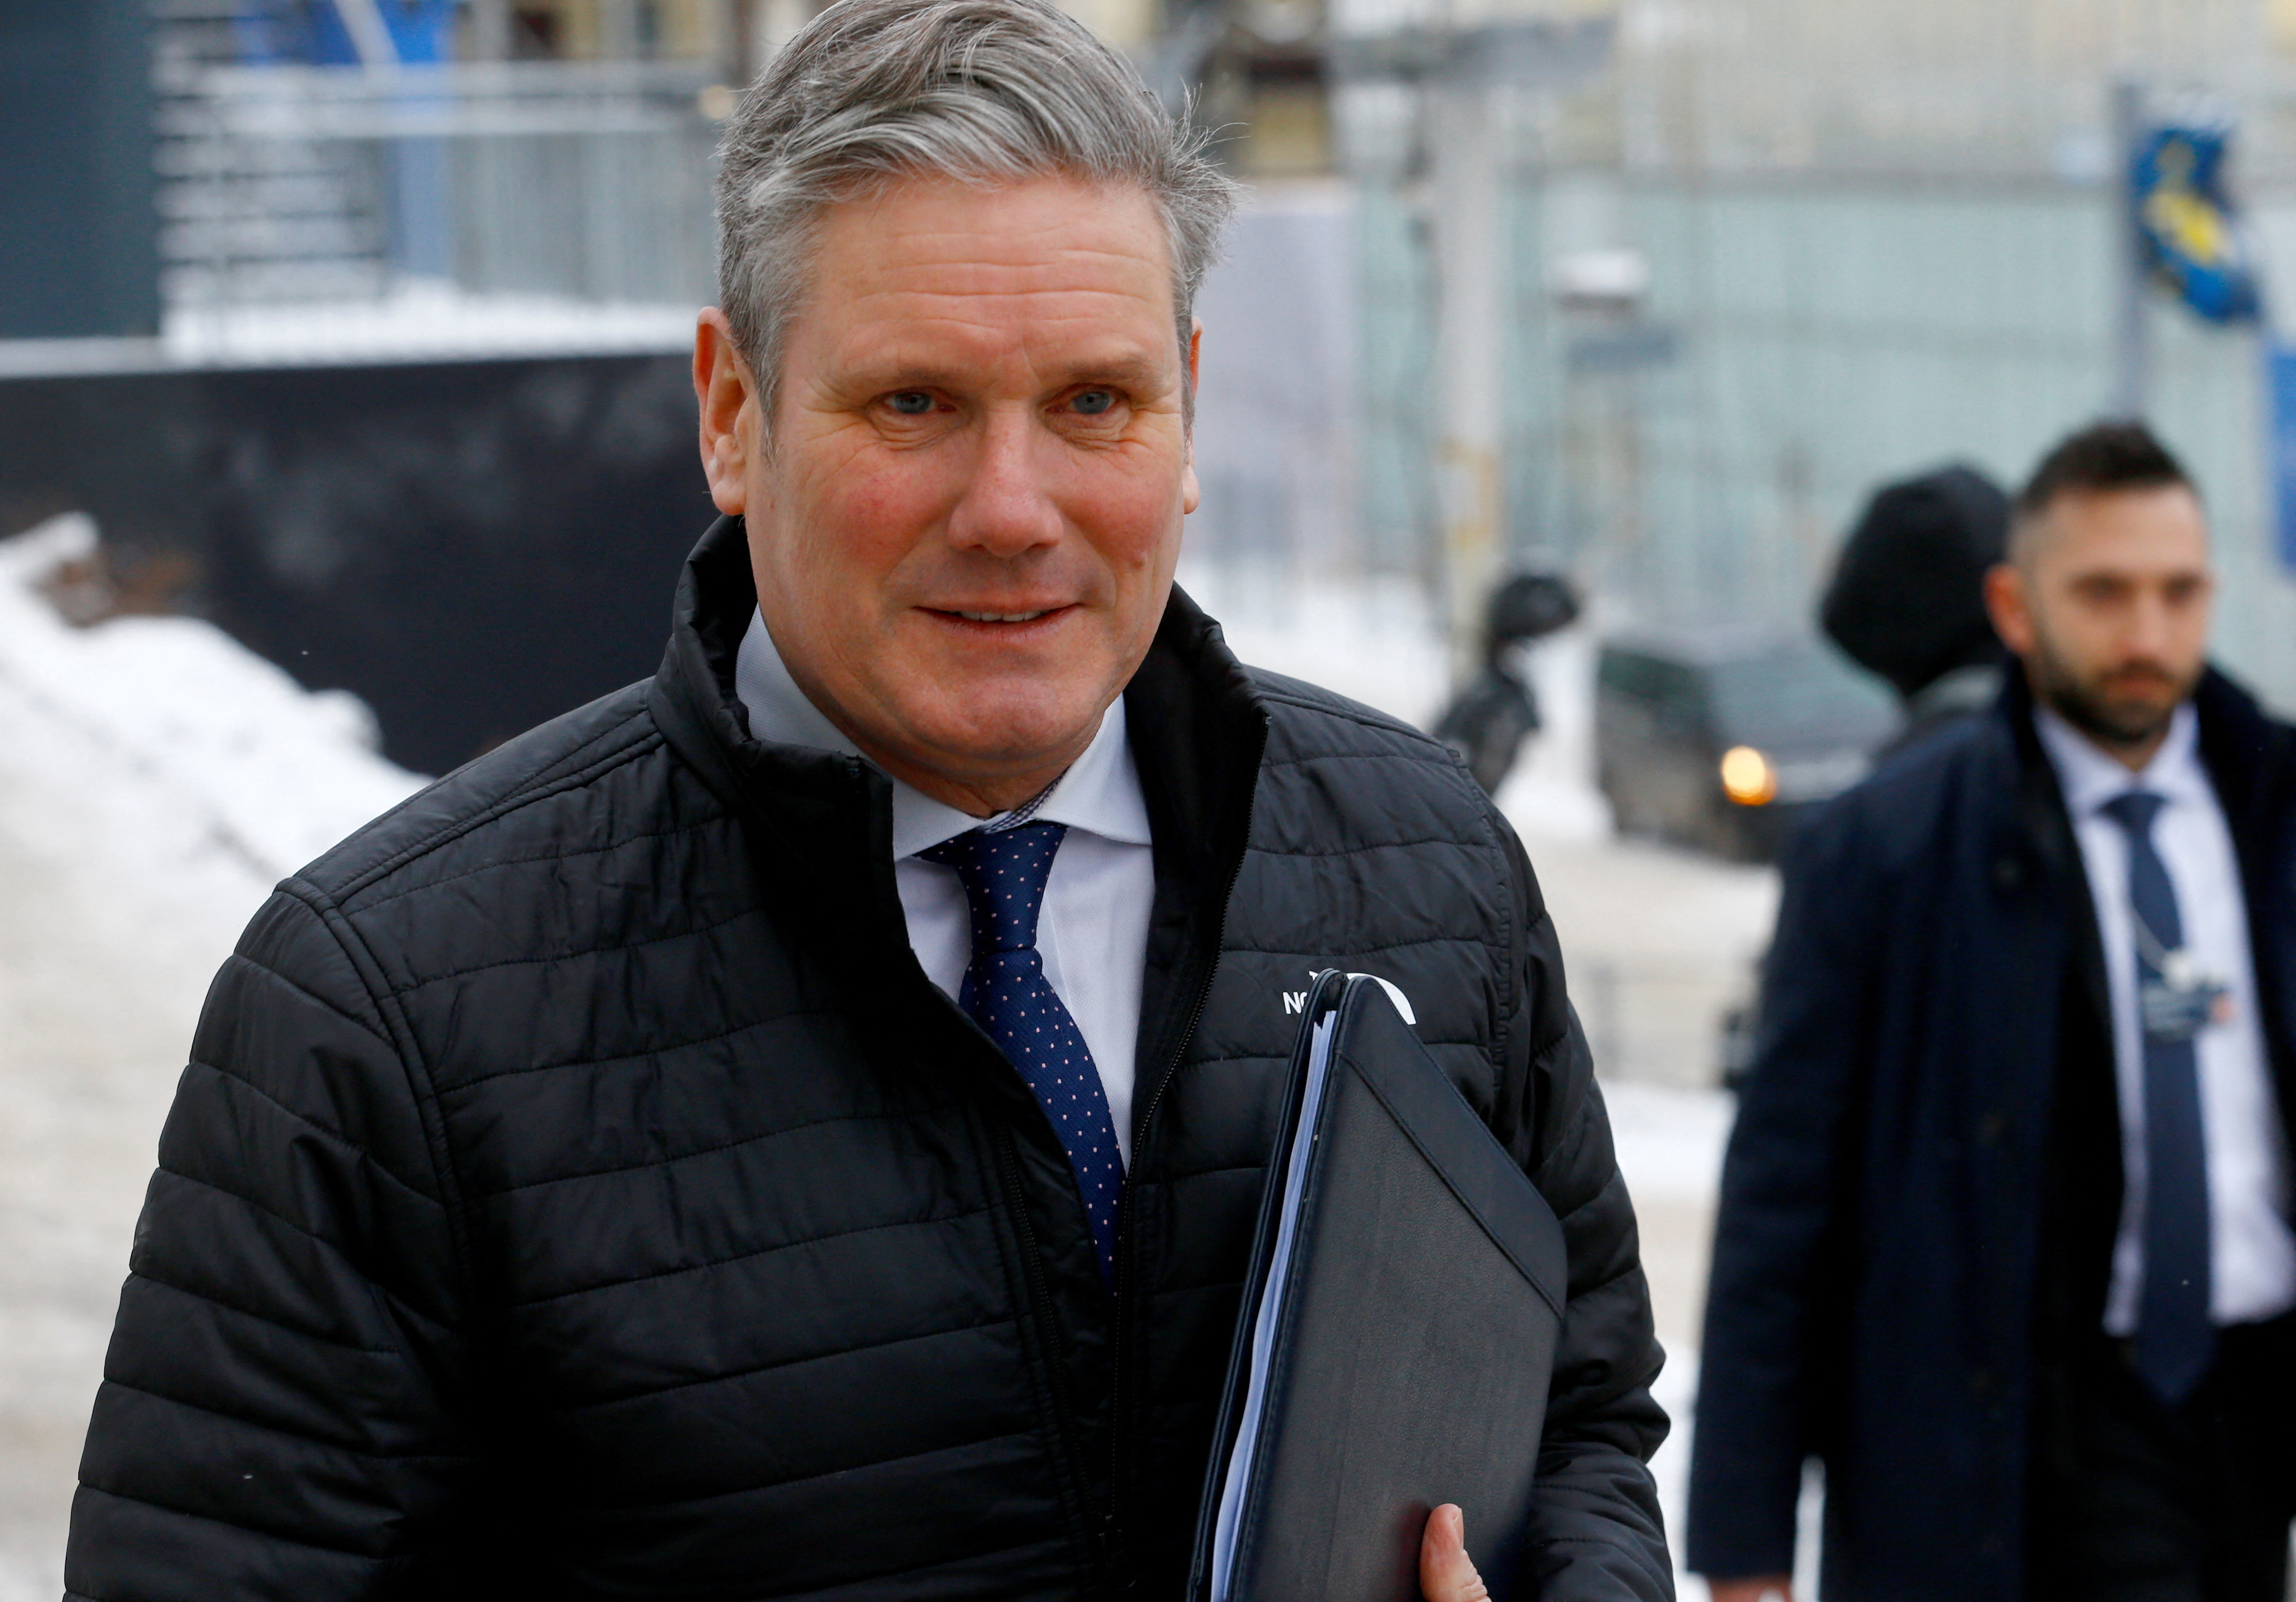 Britain's Labour leader Starmer walks to a meeting during the World Economic Forum in Davos